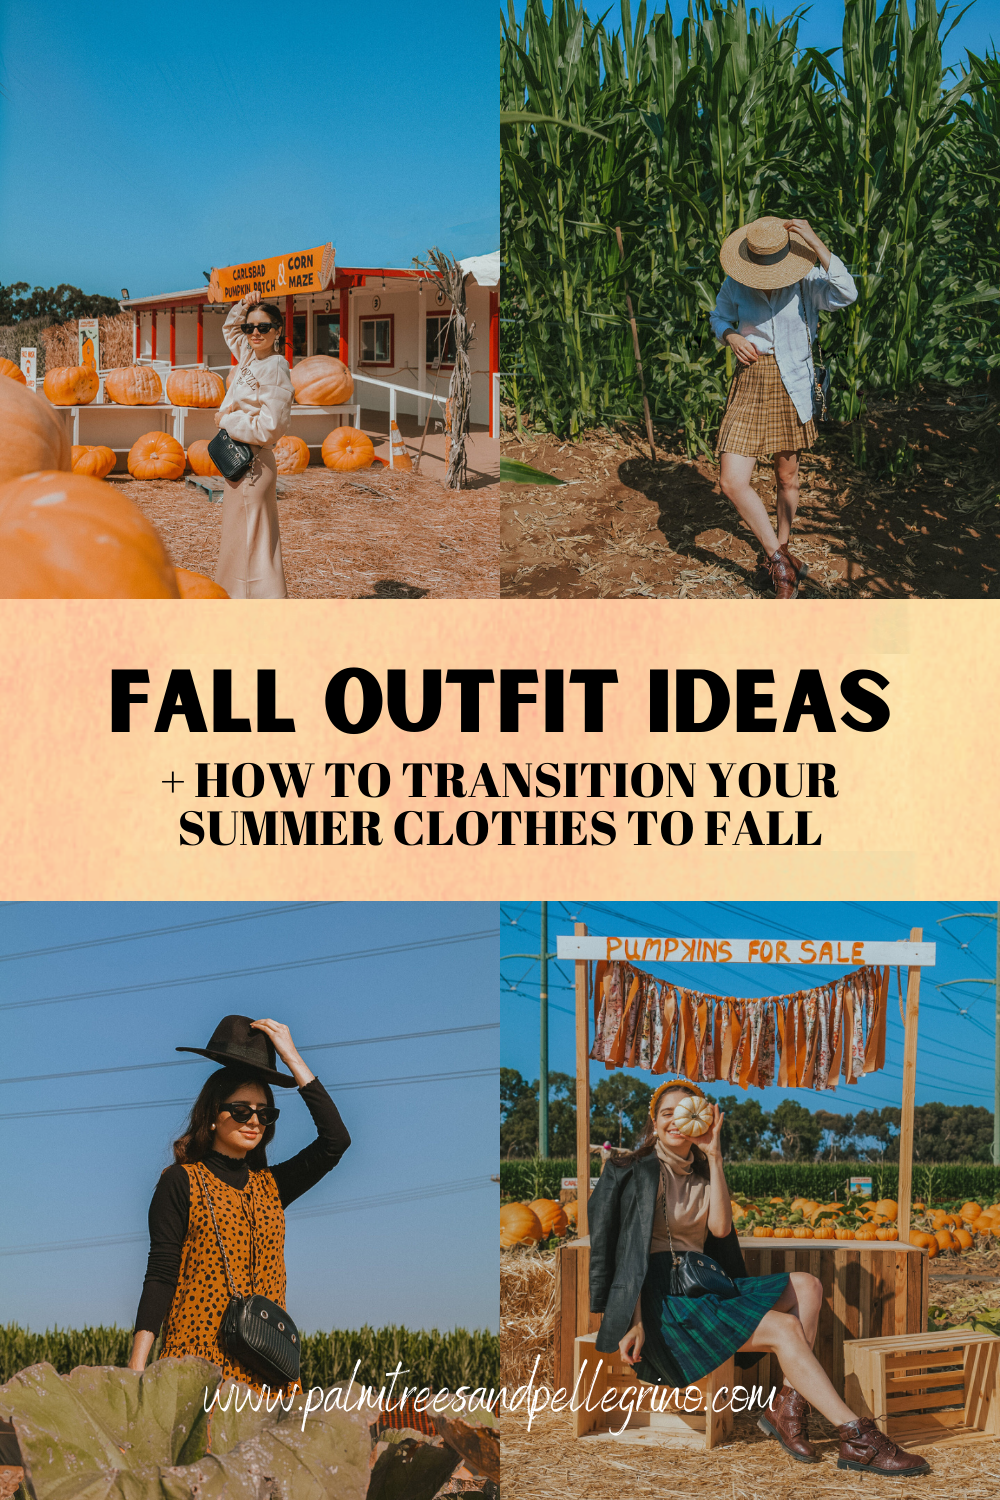 Fall 2020 Fashion Trends: 5 Fall Outfit Ideas You Can Try Now